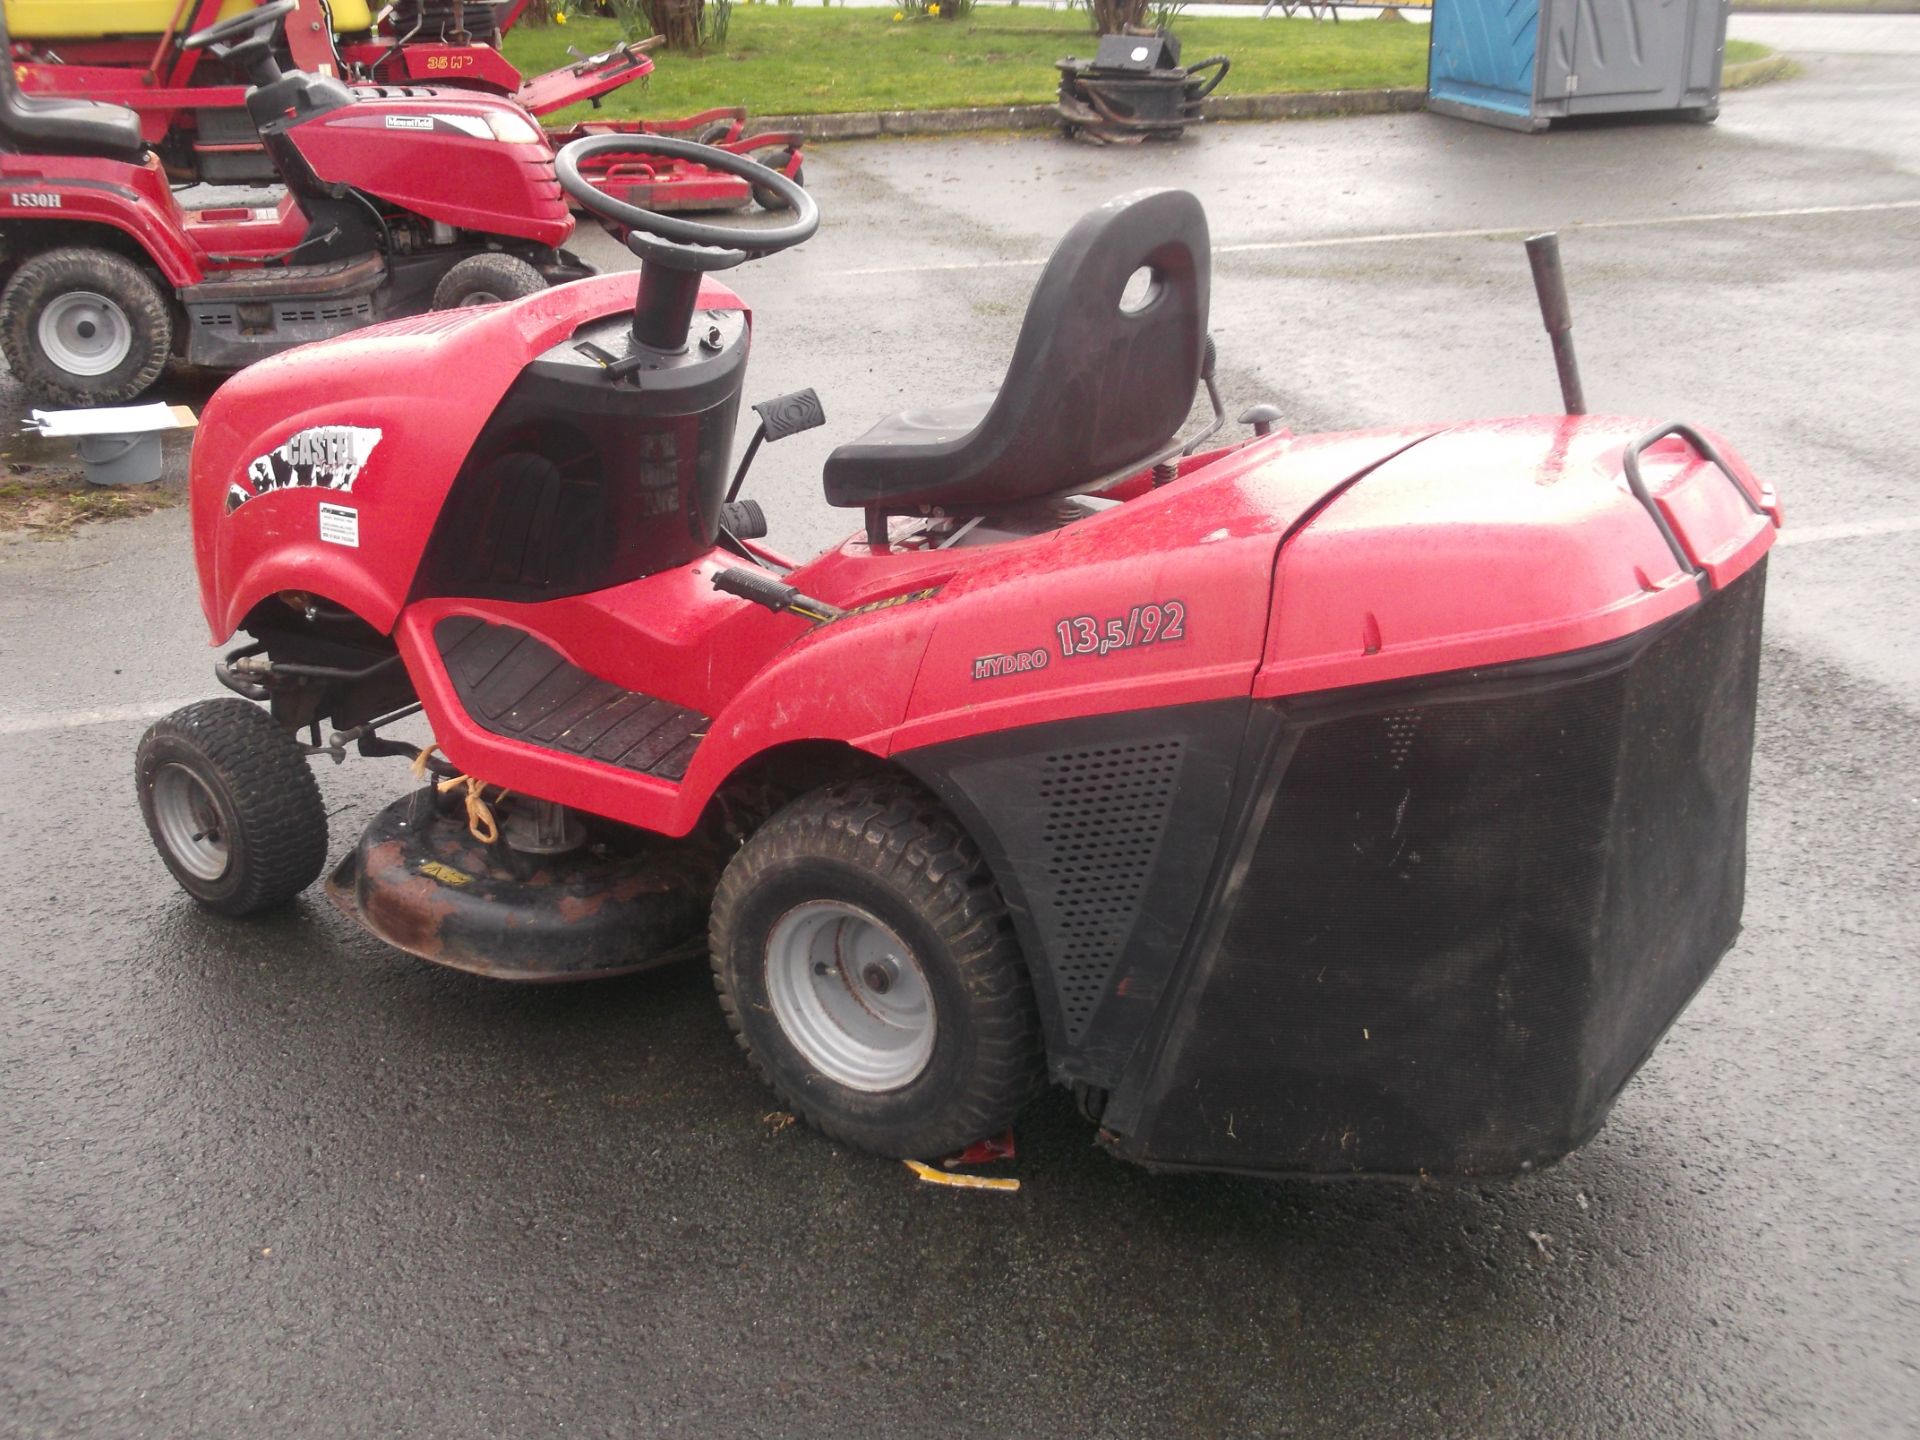 RIDE ON MOWER. XF130HD. + COLLECTION BOX - Image 3 of 3